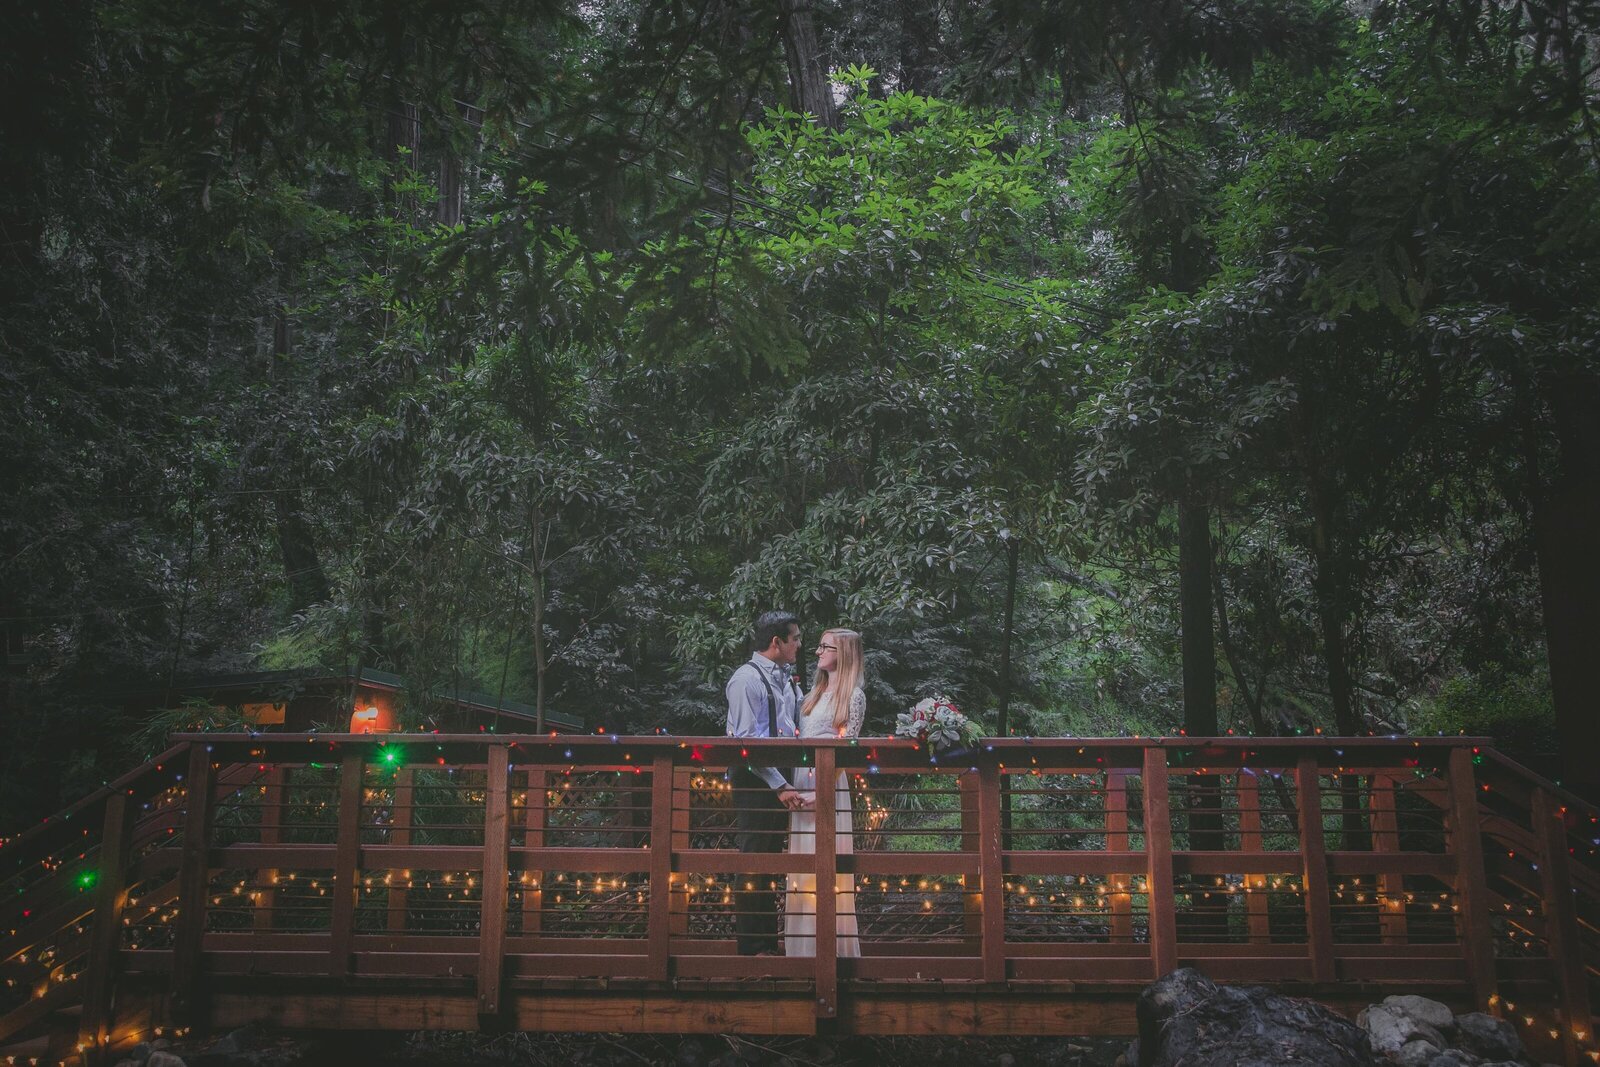 Couple looks at each other on bridge surrounded by redwood trees.